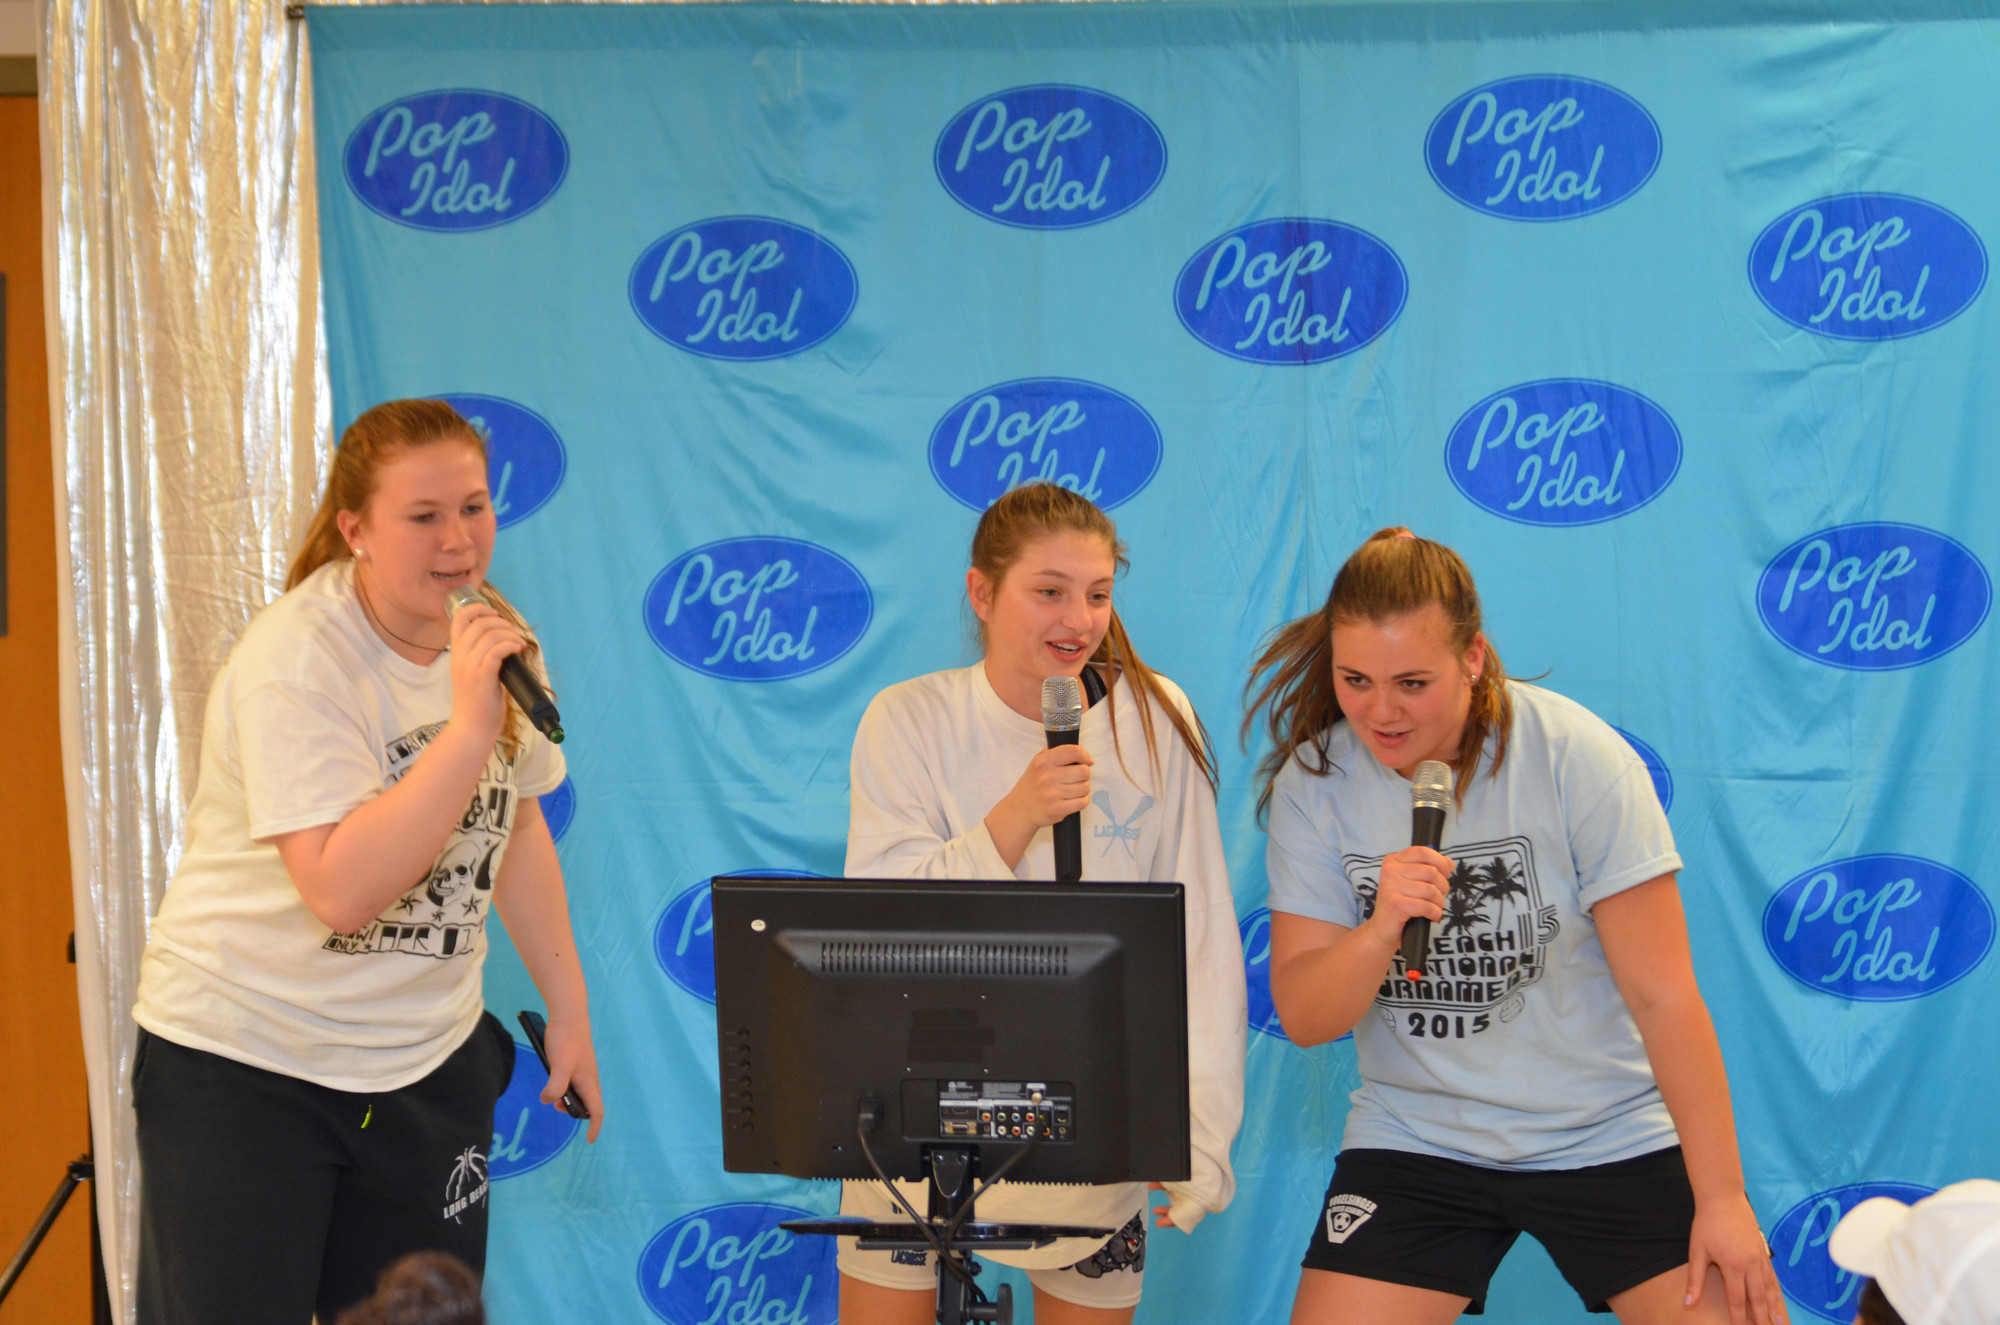 Sophomores Emily Rivera and Jen Rotando and junior Jess Marcote belted out the tunes during Pop Idol karaoke.